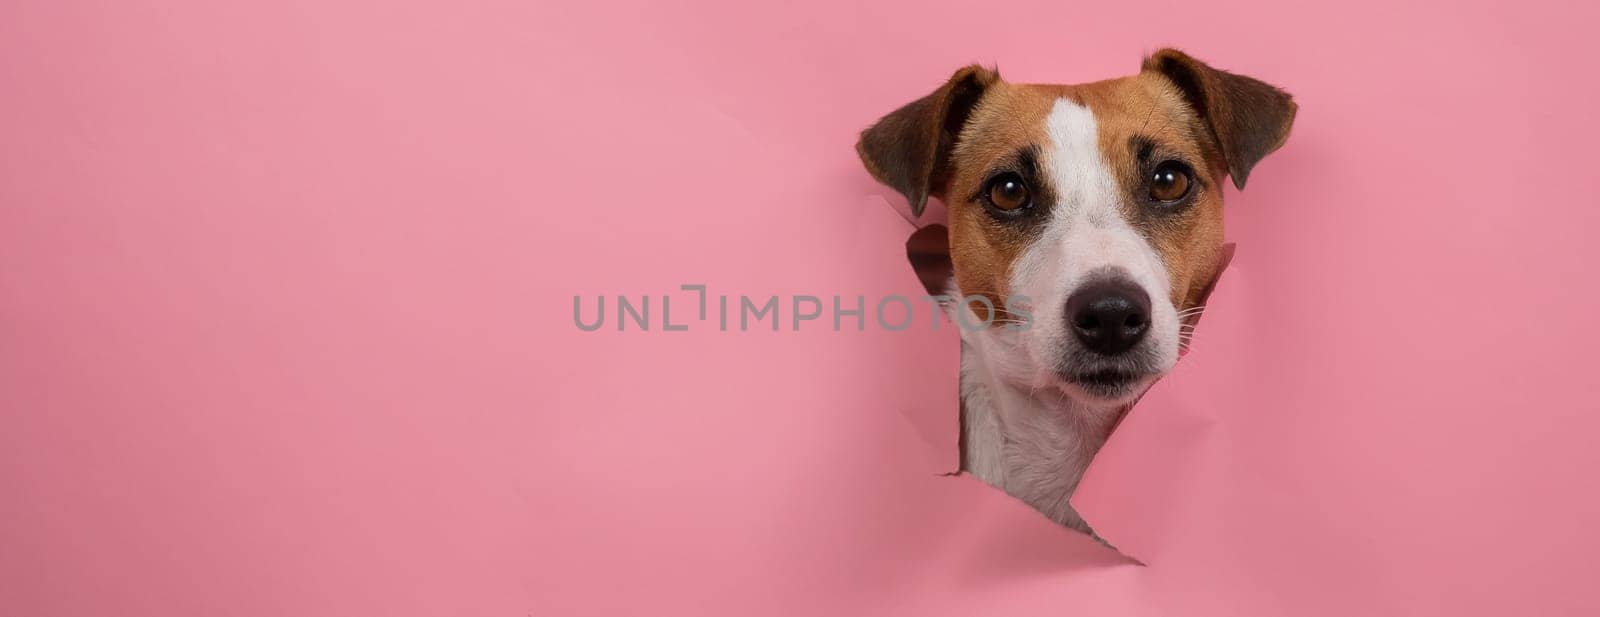 Funny dog jack russell terrier tore pink paper background. Widescreen